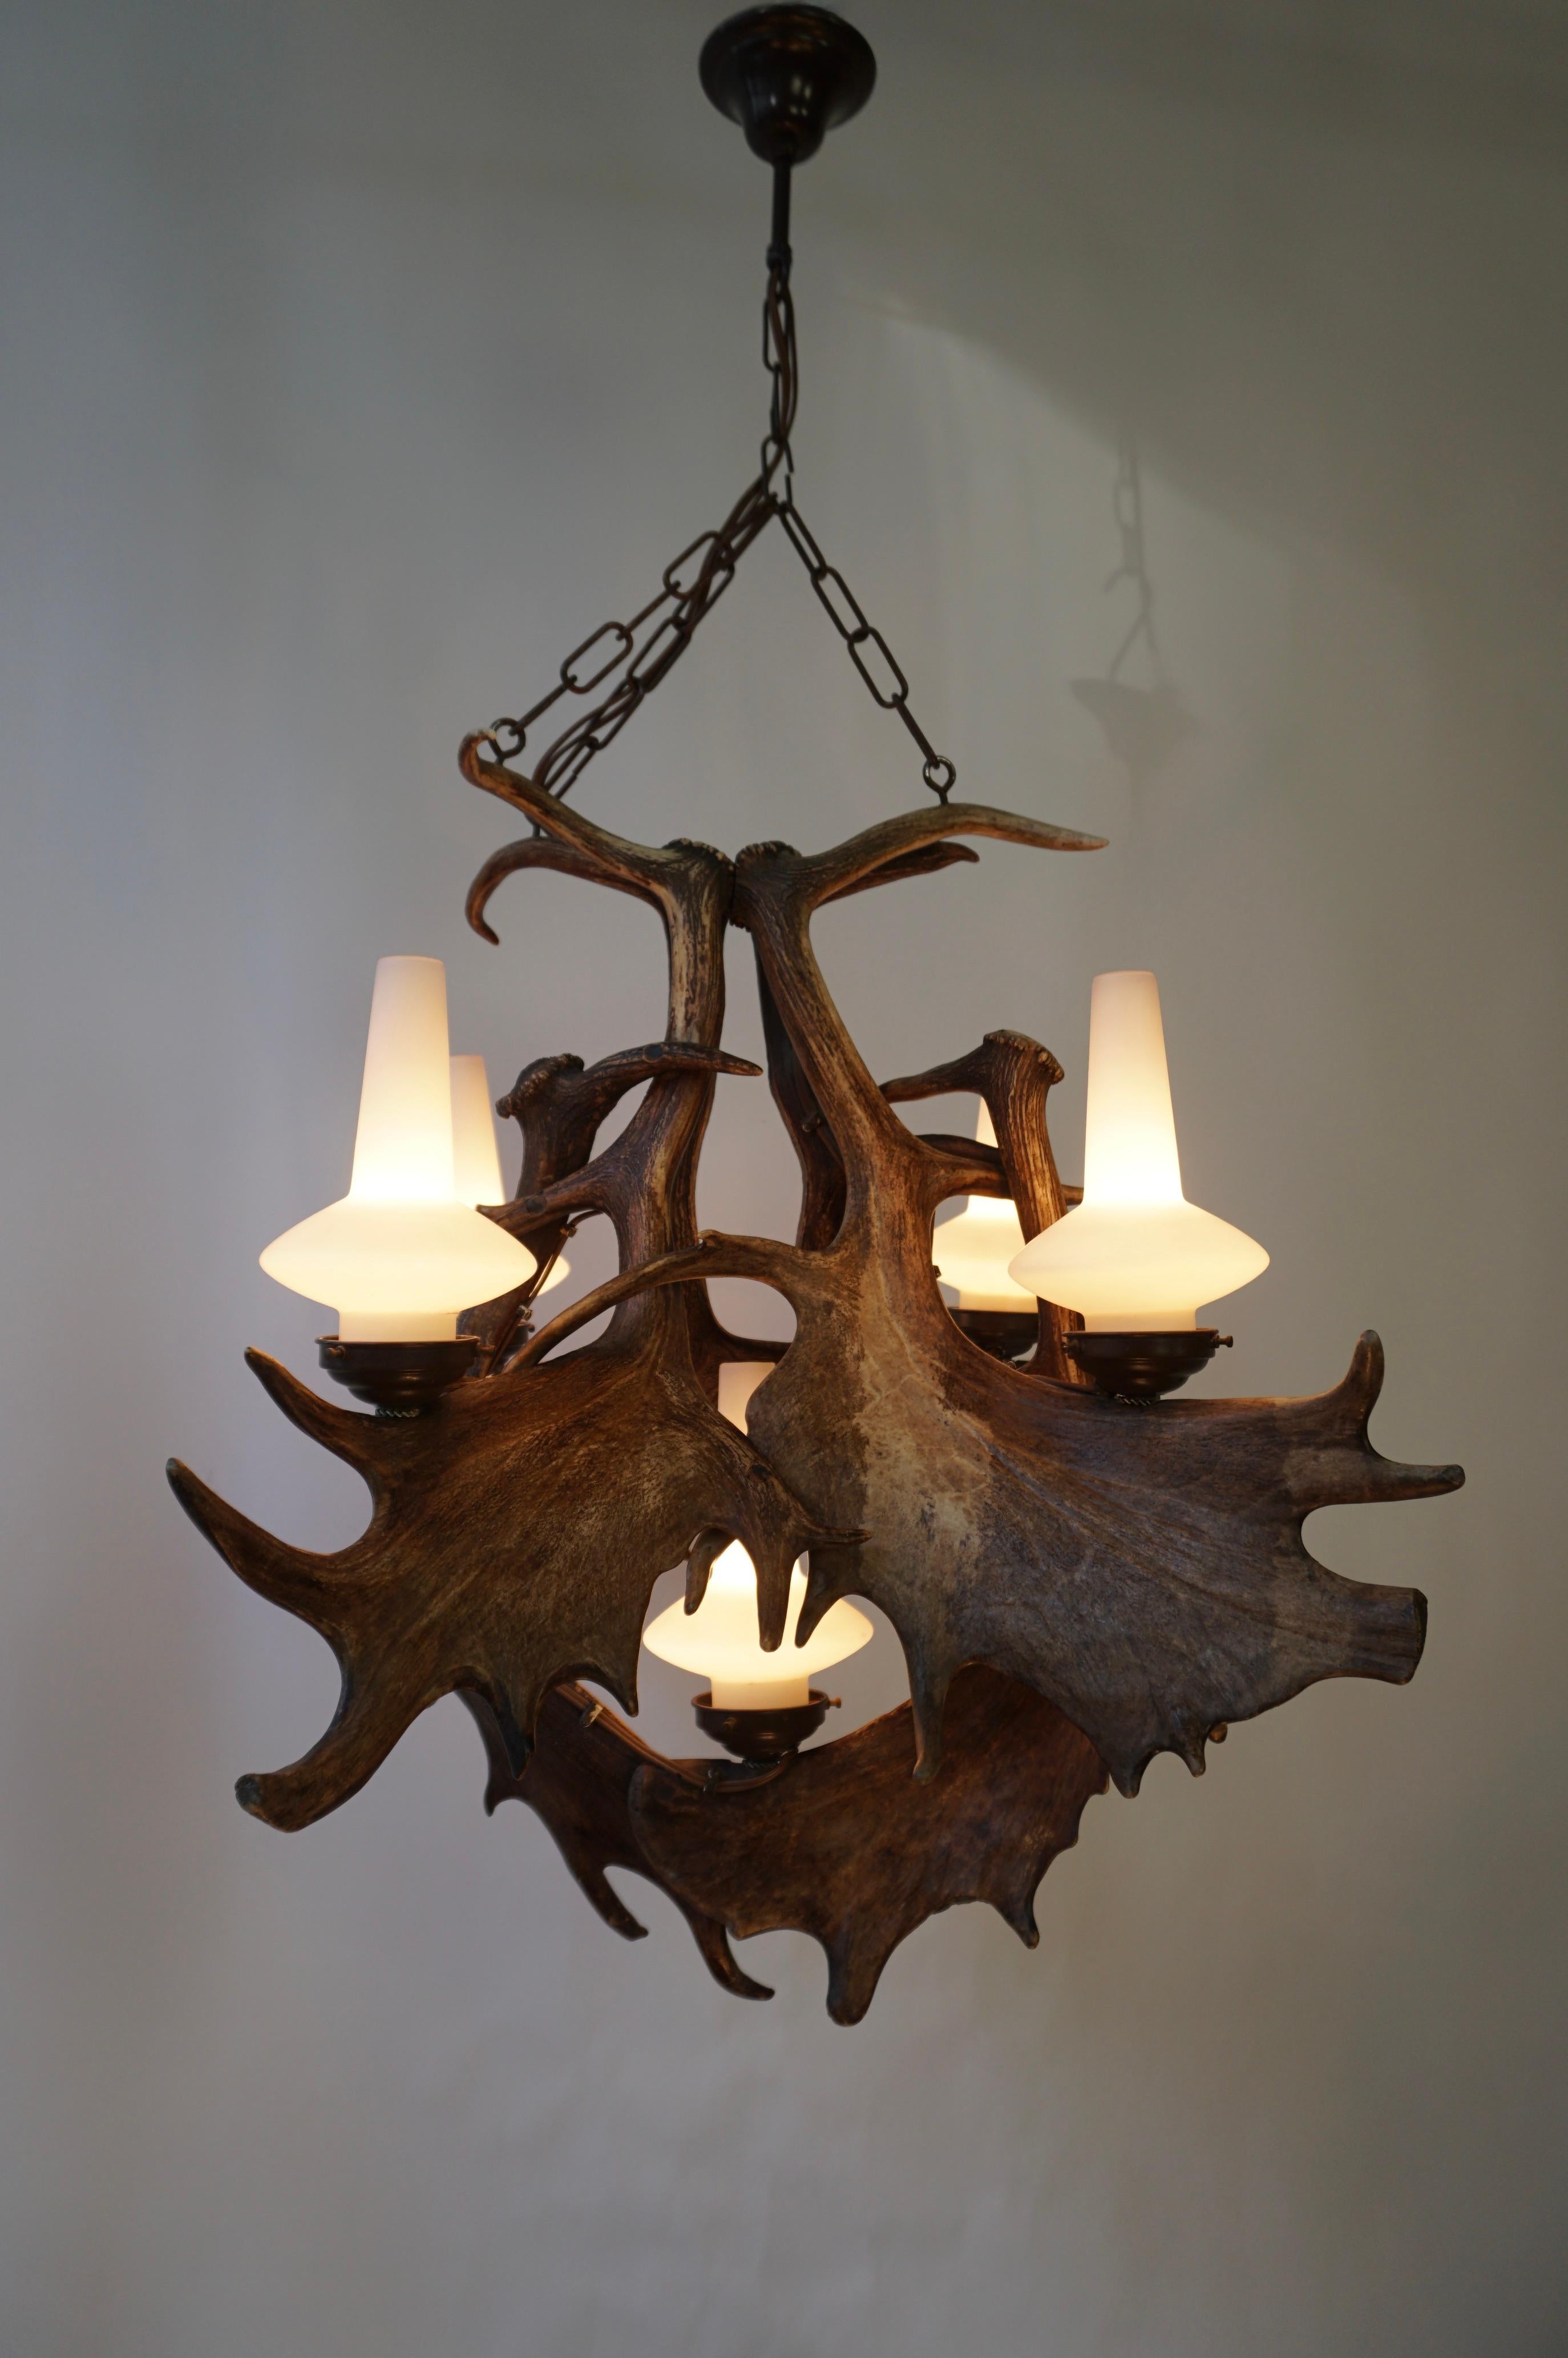 Chandelier made of antlers (HG 222-E). The chandelier is made of deer antler with opaline glass shades.

Antique Rustic Deer Antler Chandelier was cleverly hand-crafted from antlers found in the forest shed naturally from male deer after the rut